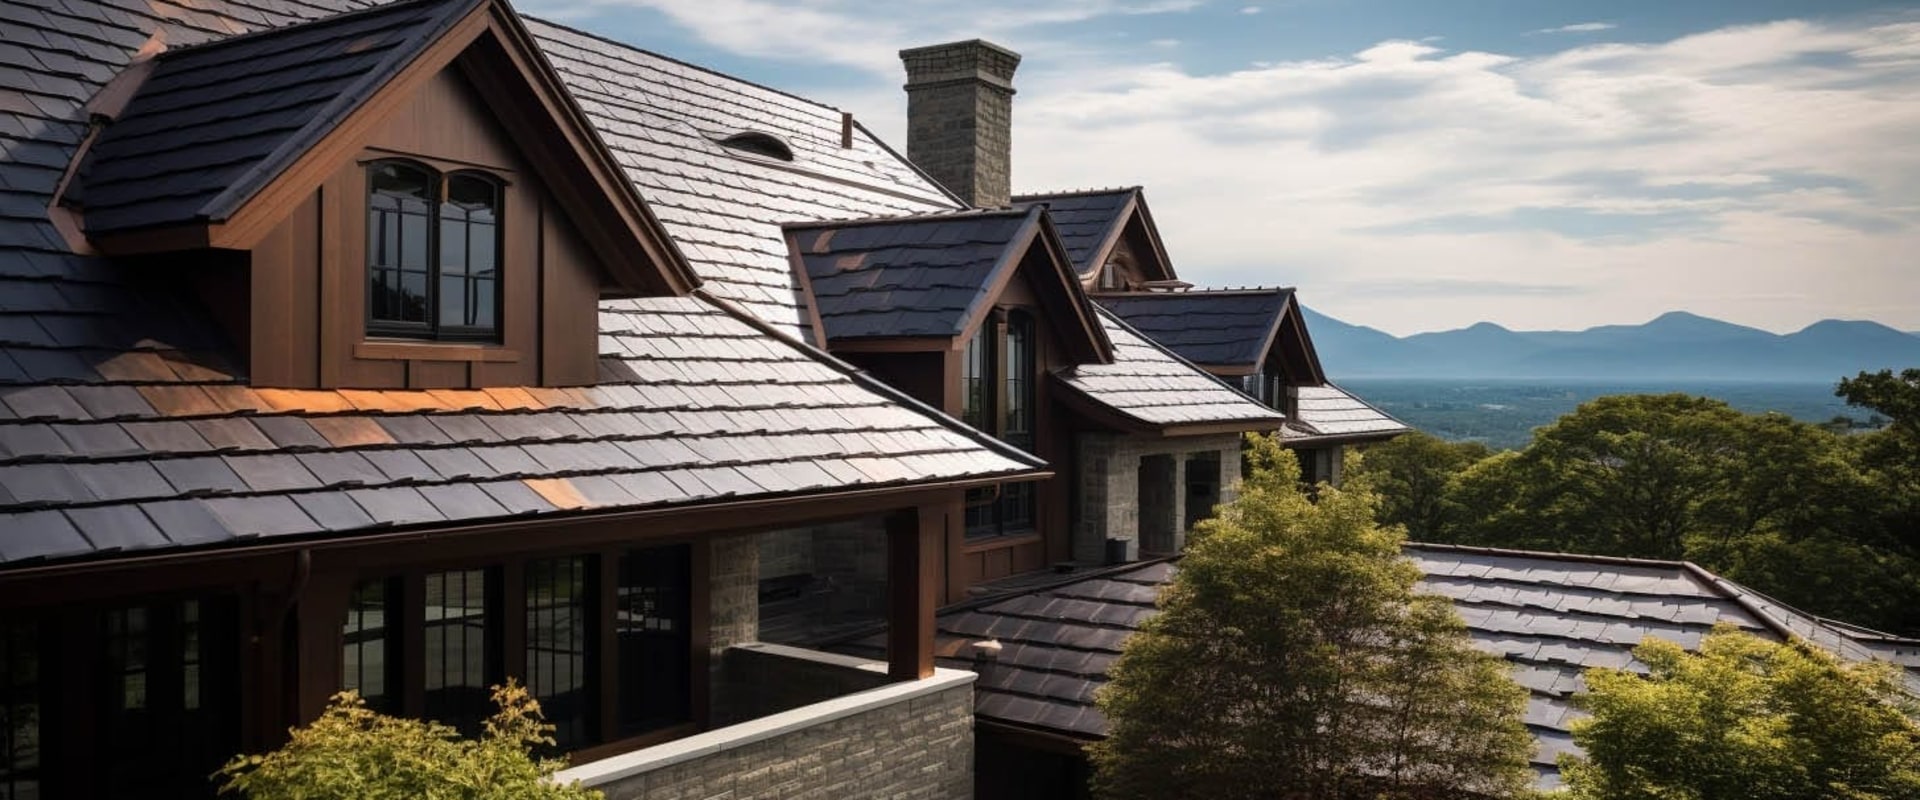 Aesthetics in Roofing and Siding